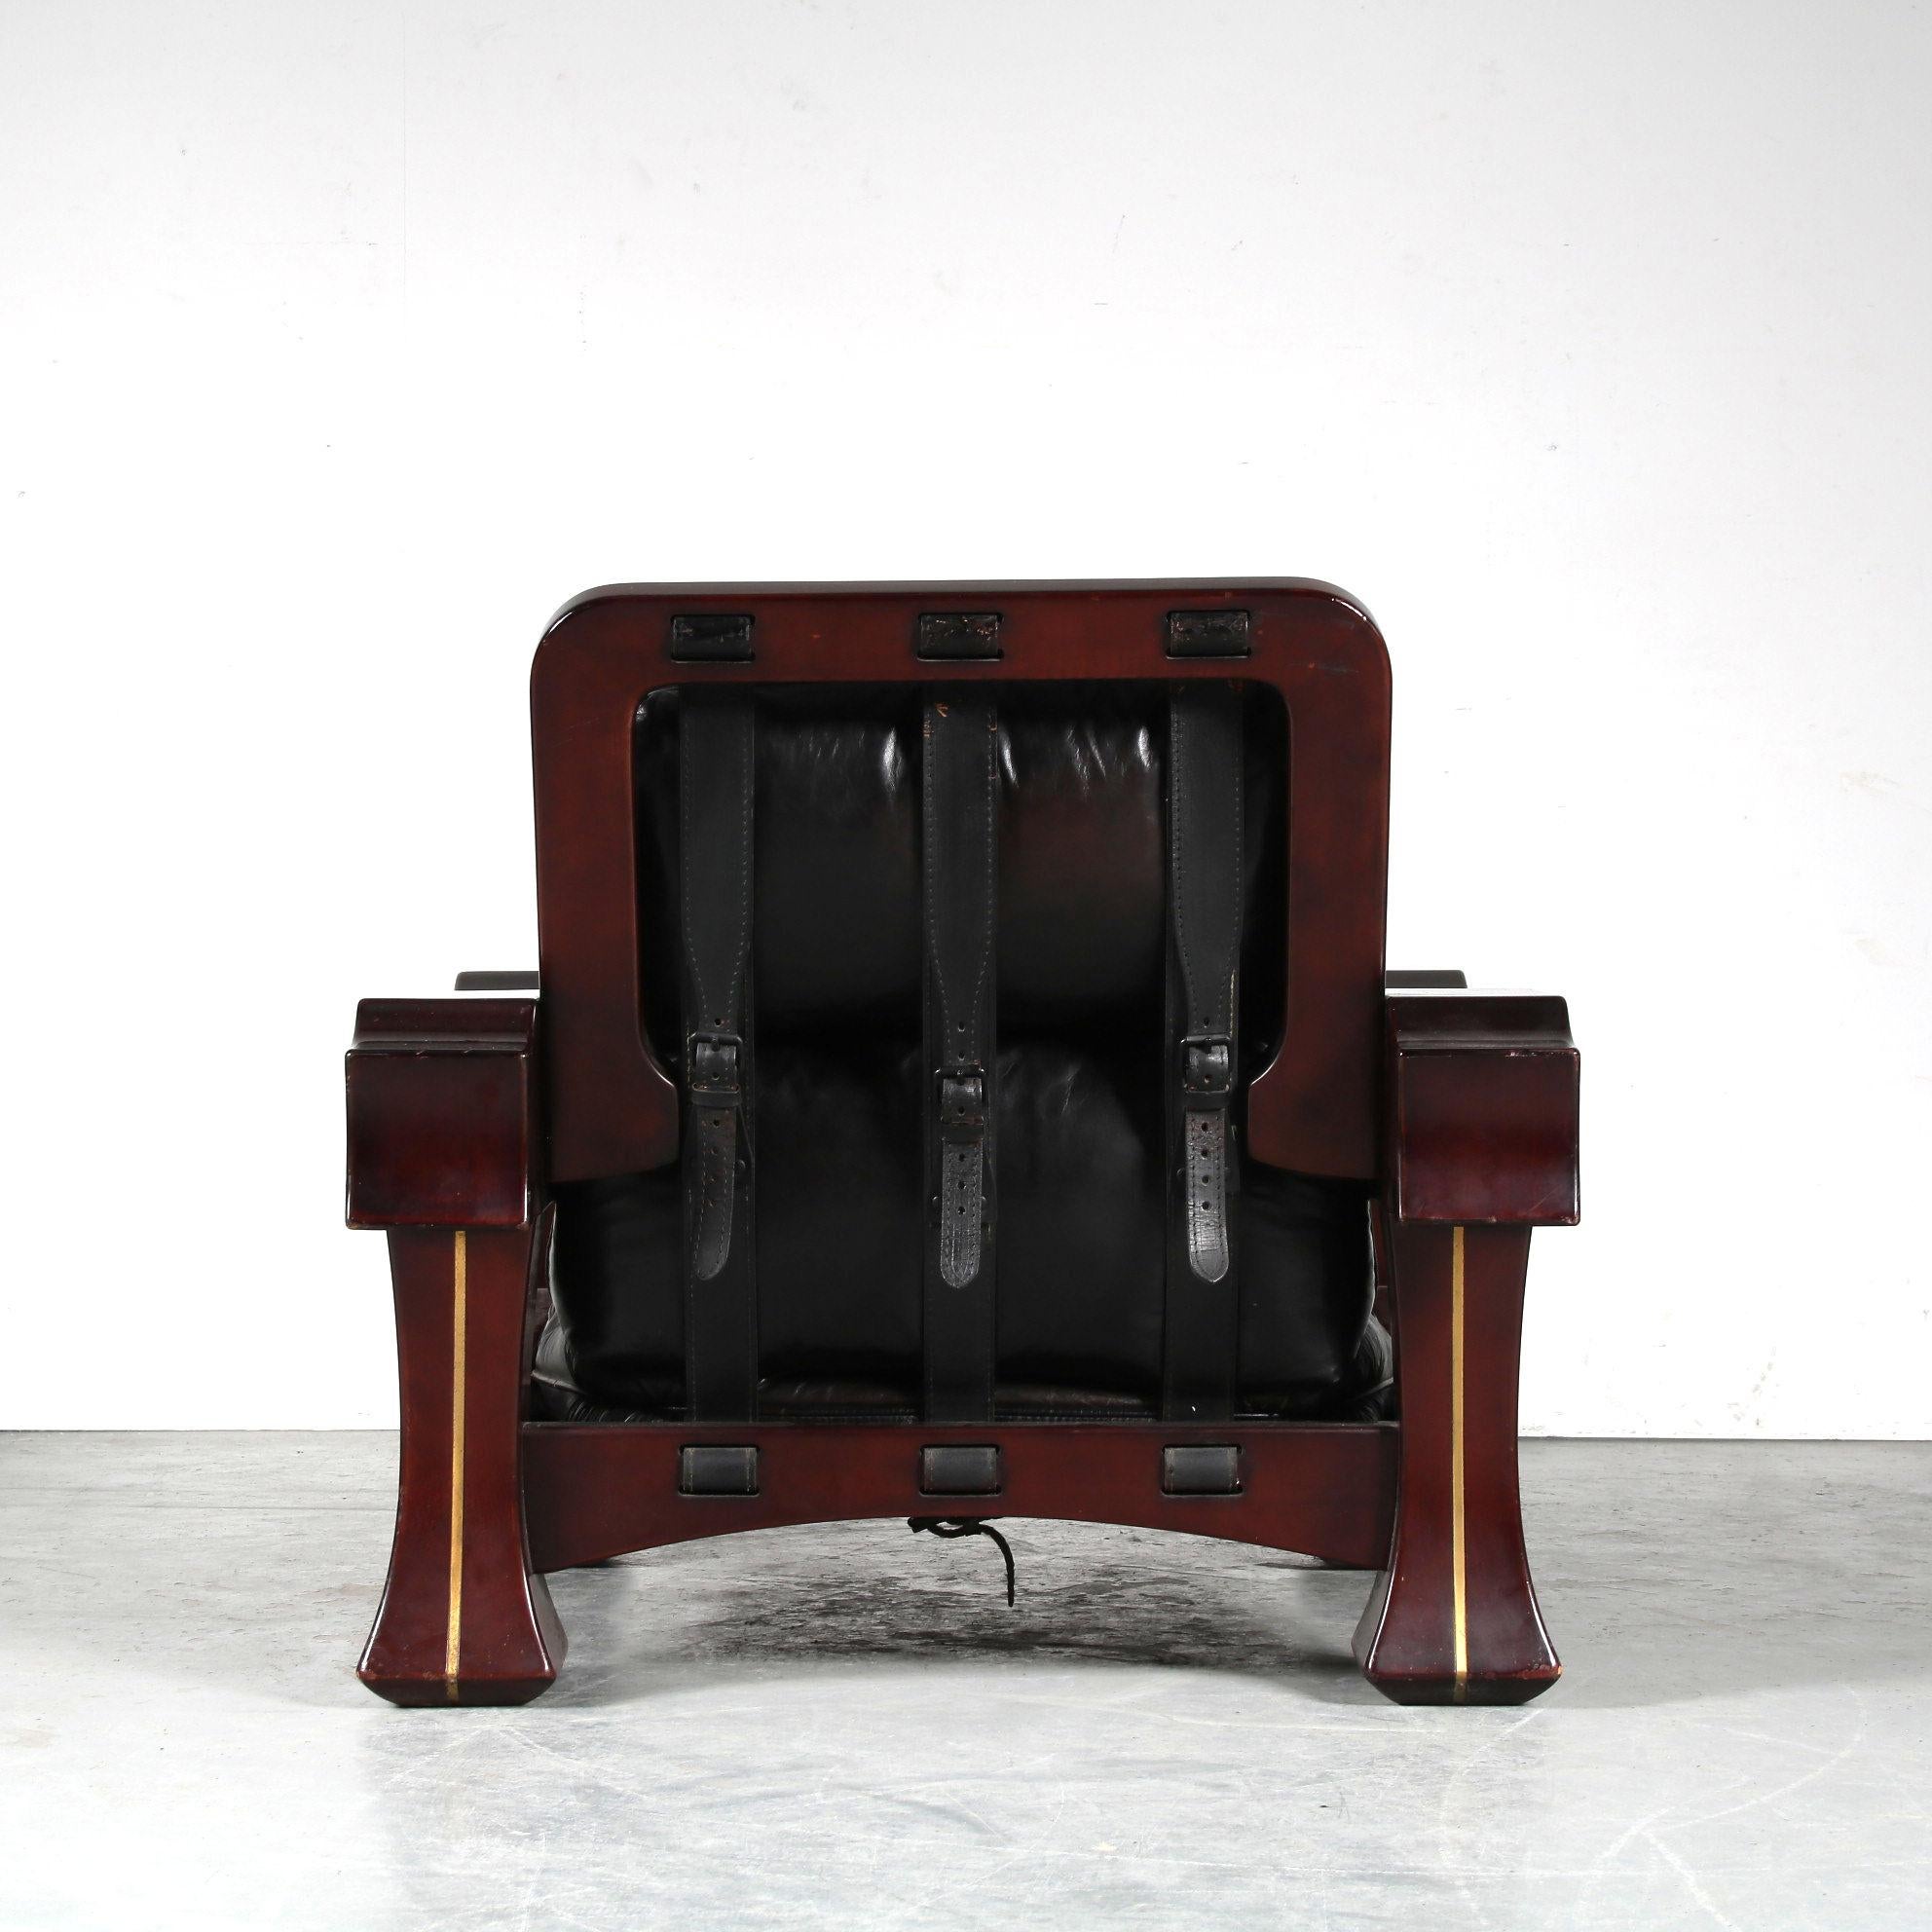 Italian Lounge Chair with Foot Stool by Luciano Frigerio, 1970 For Sale 3